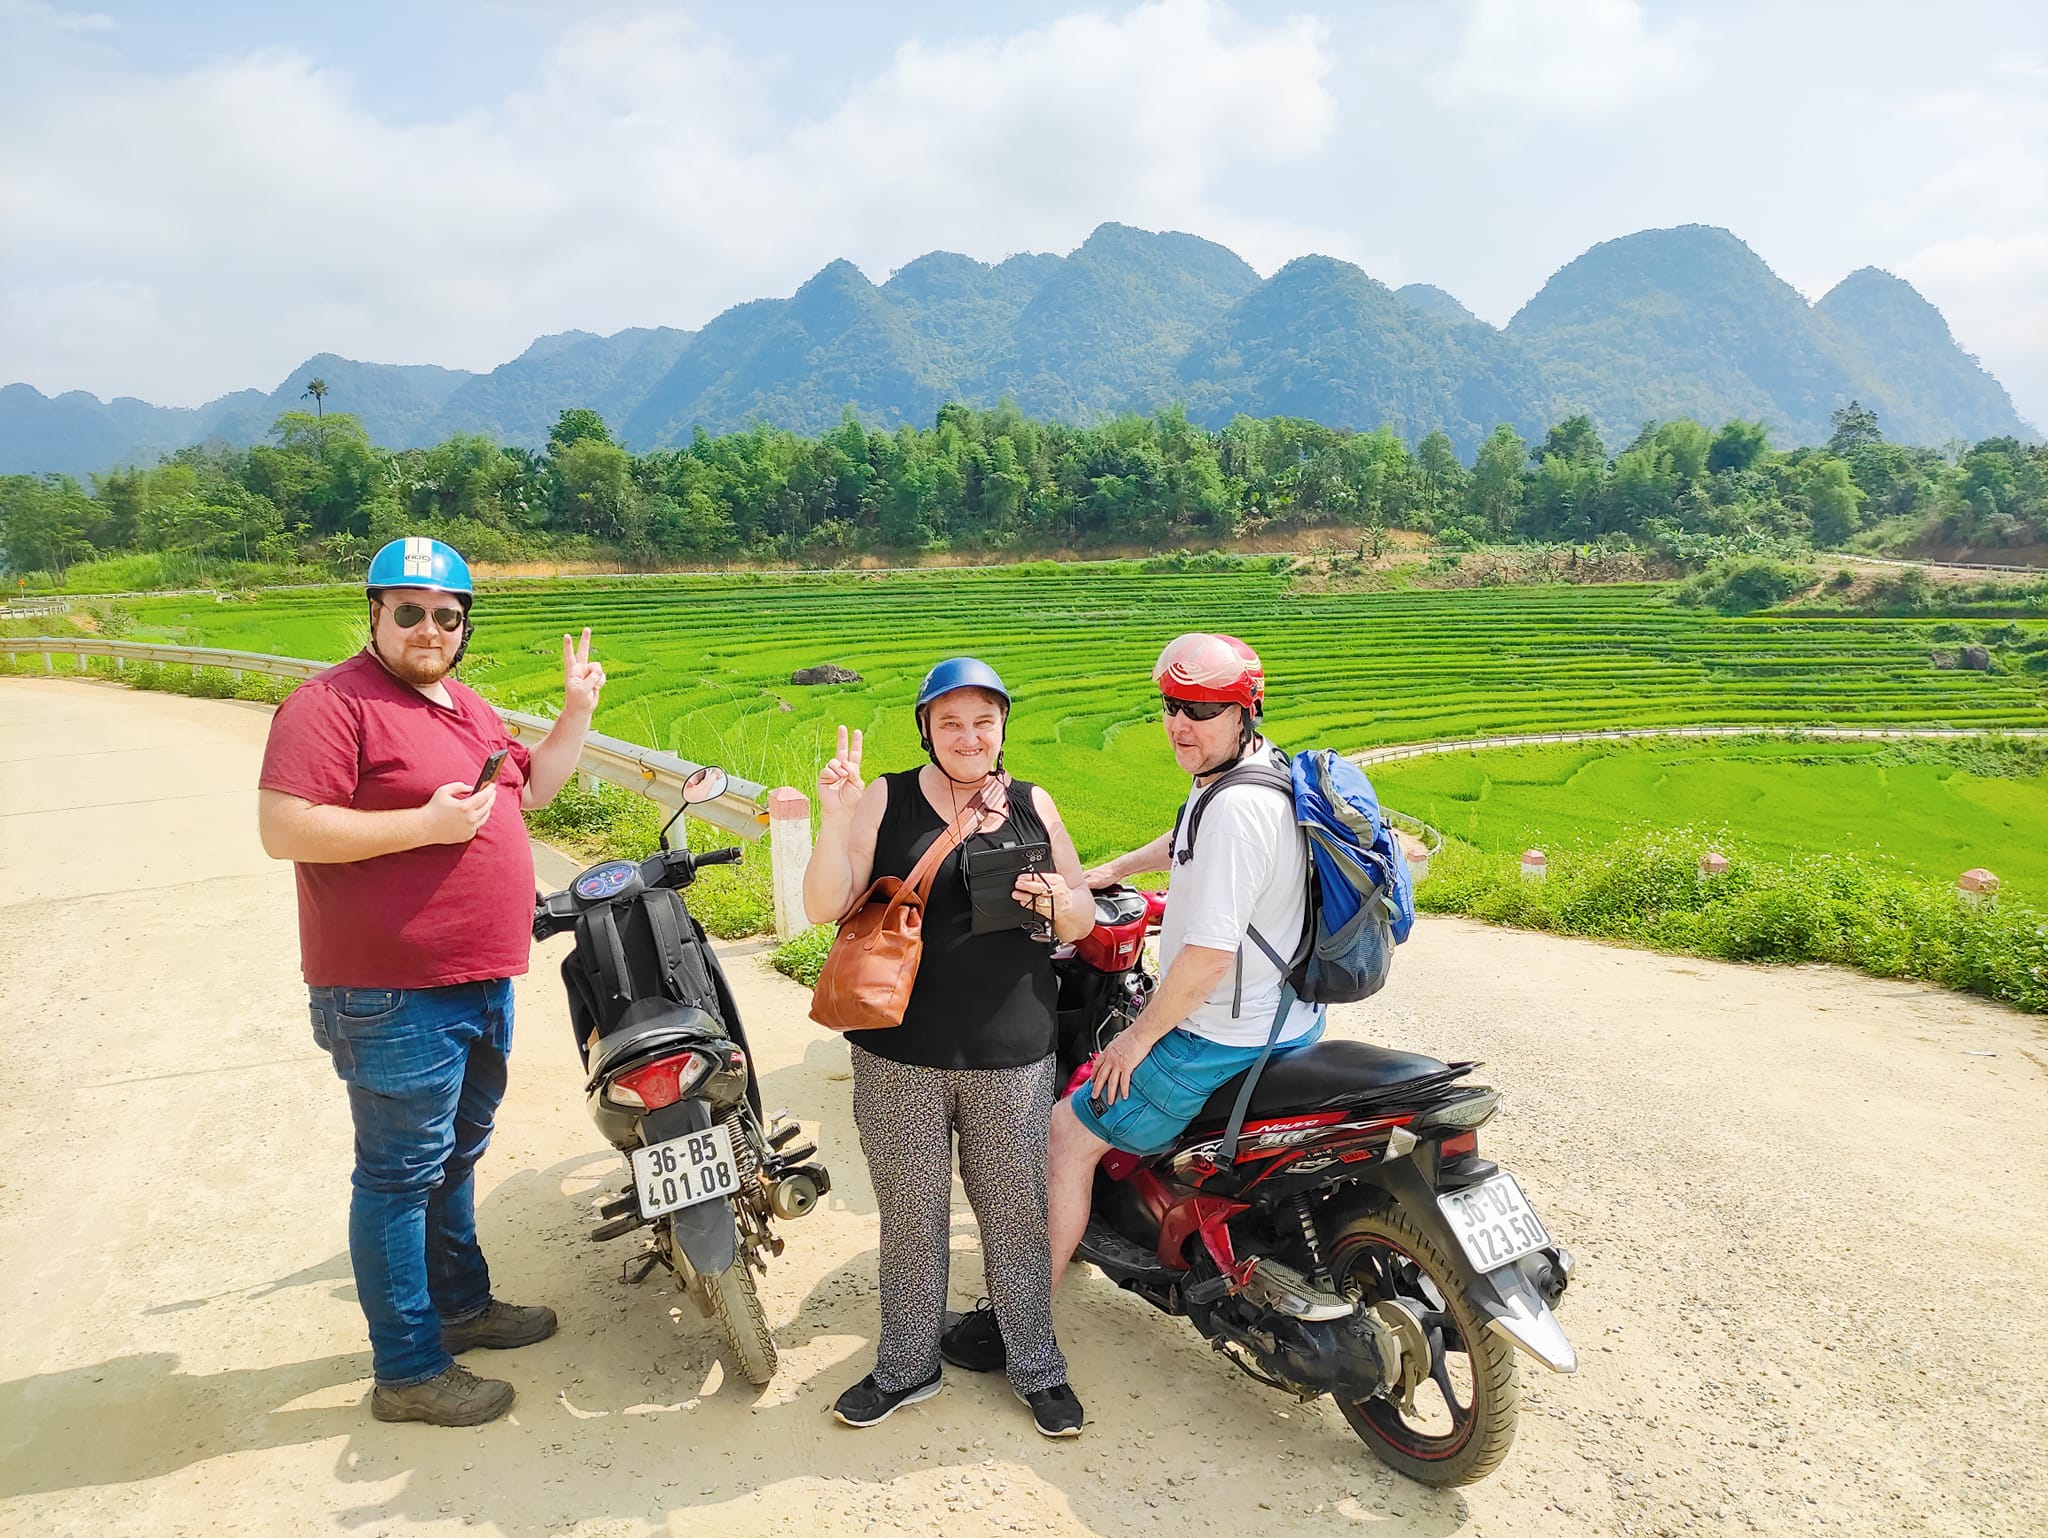 Amazing 15 days trip from North to South Vietnam